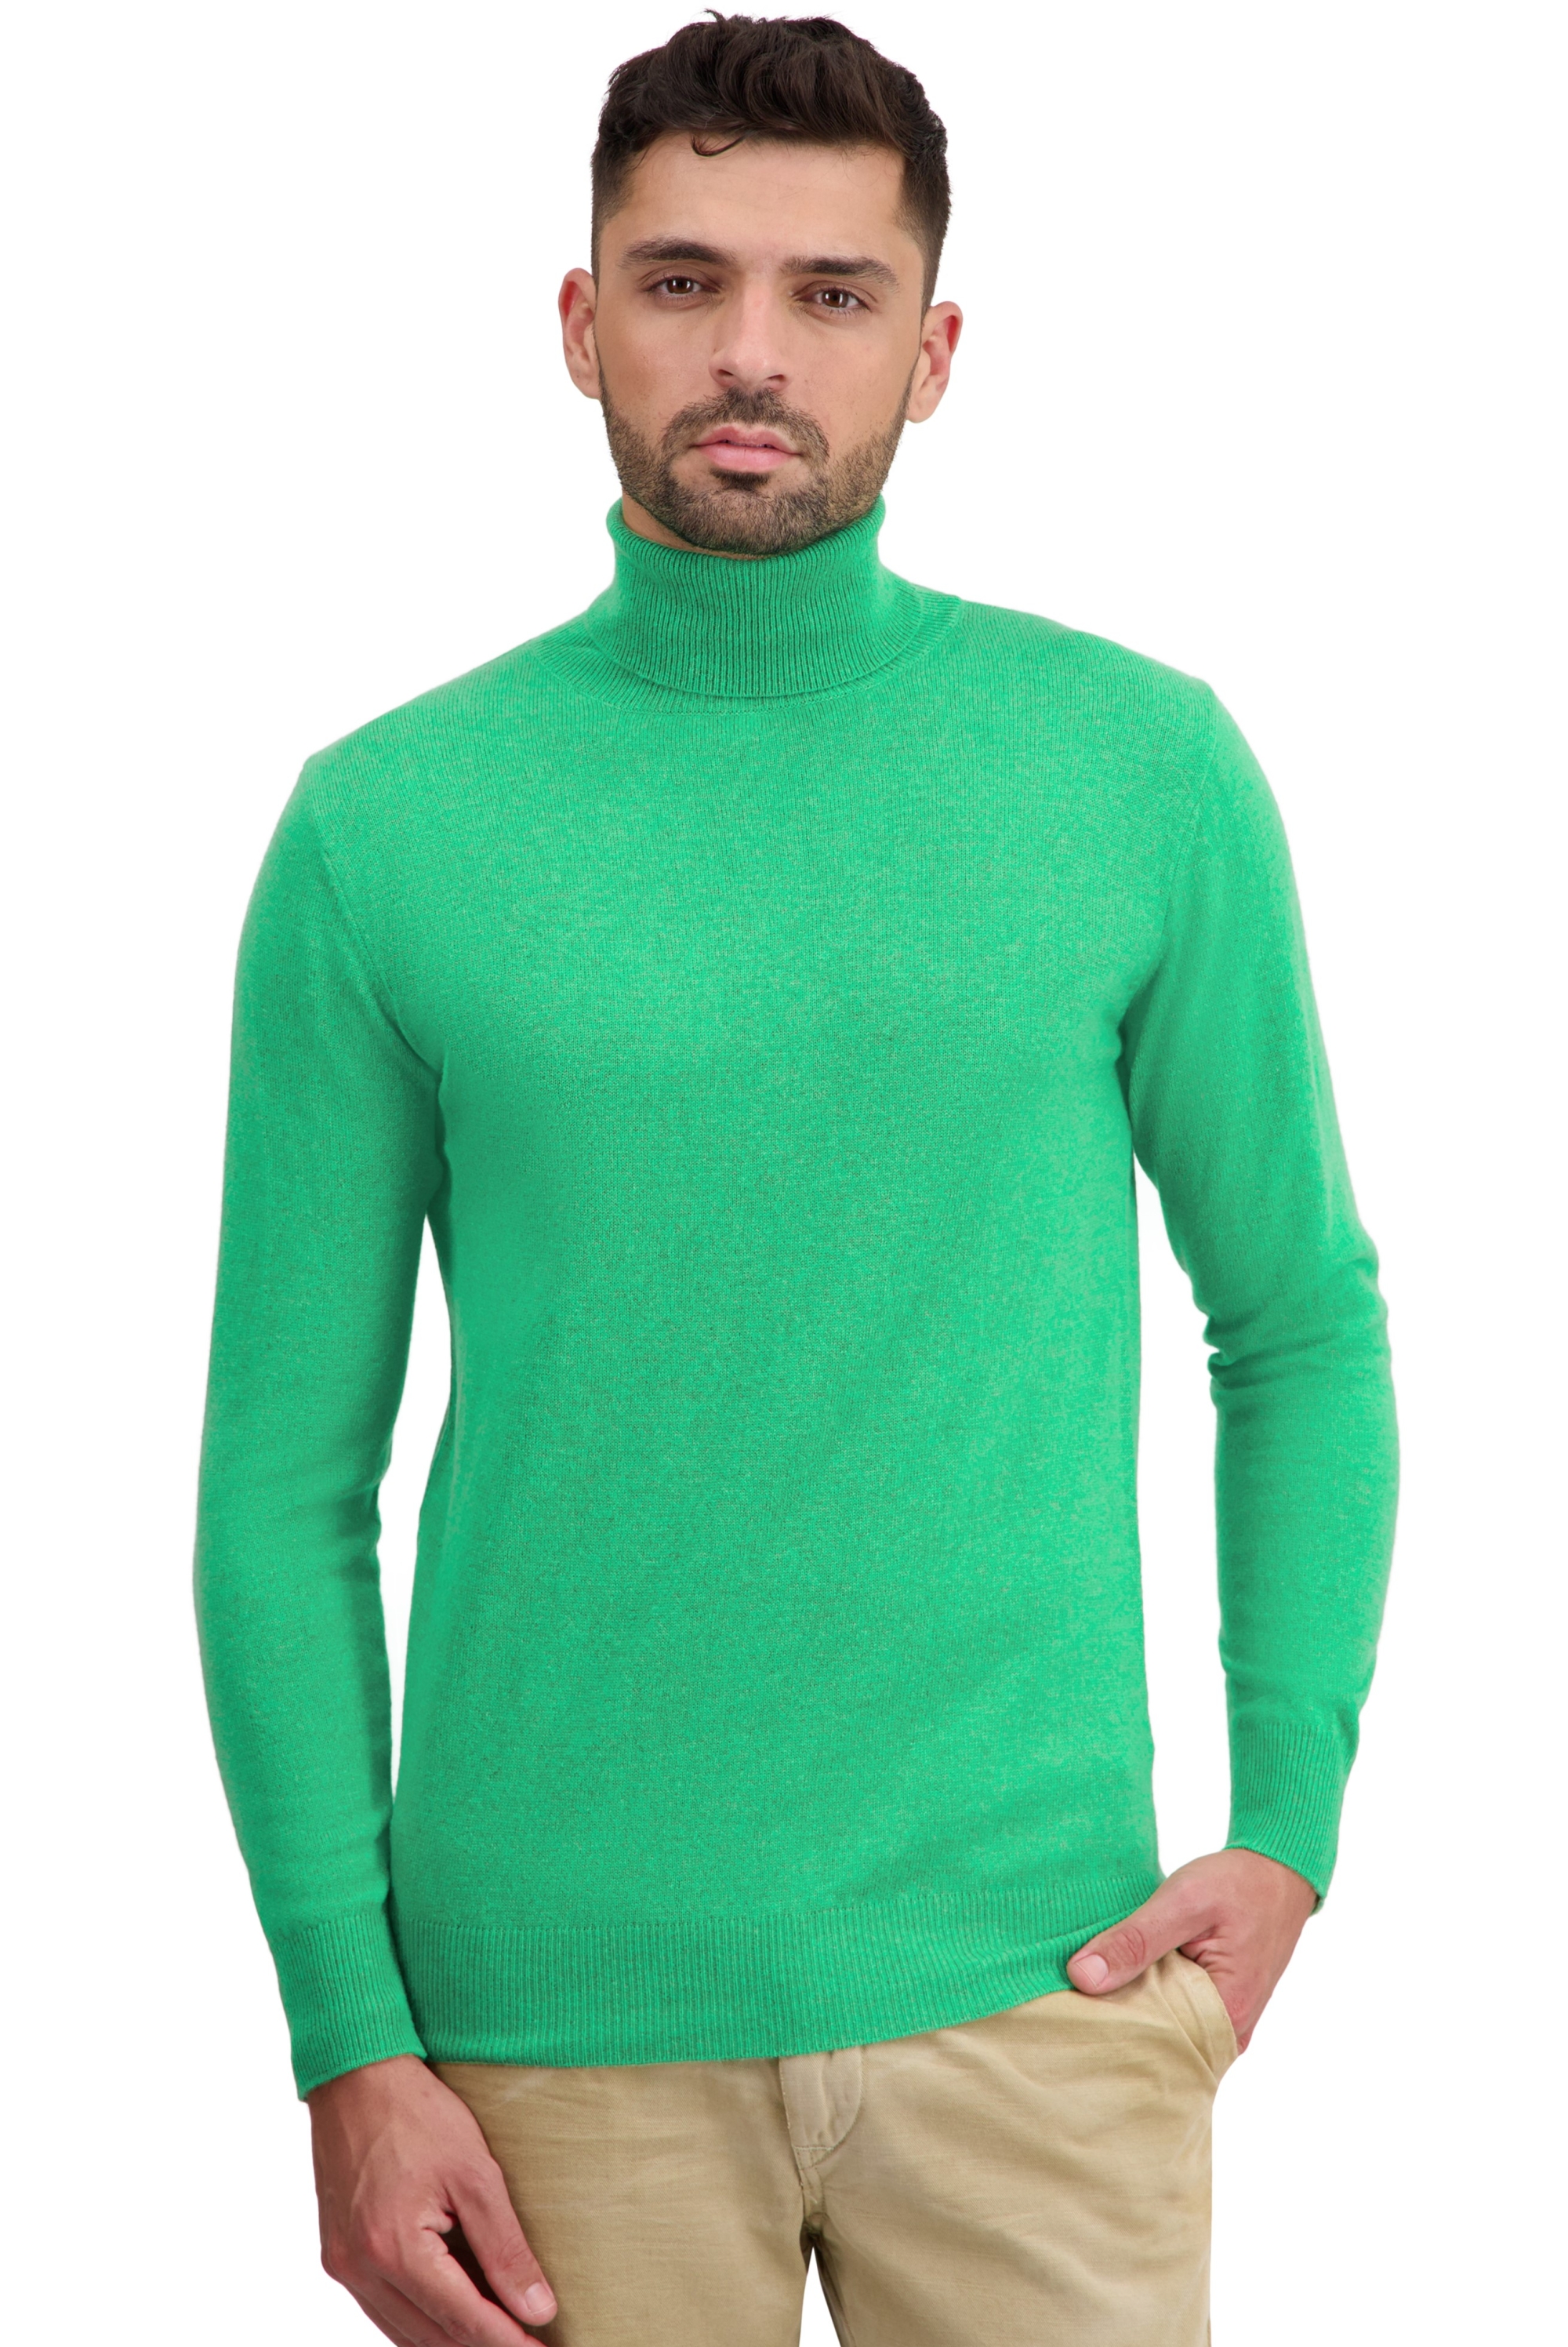 Cashmere men basic sweaters at low prices tarry first midori s